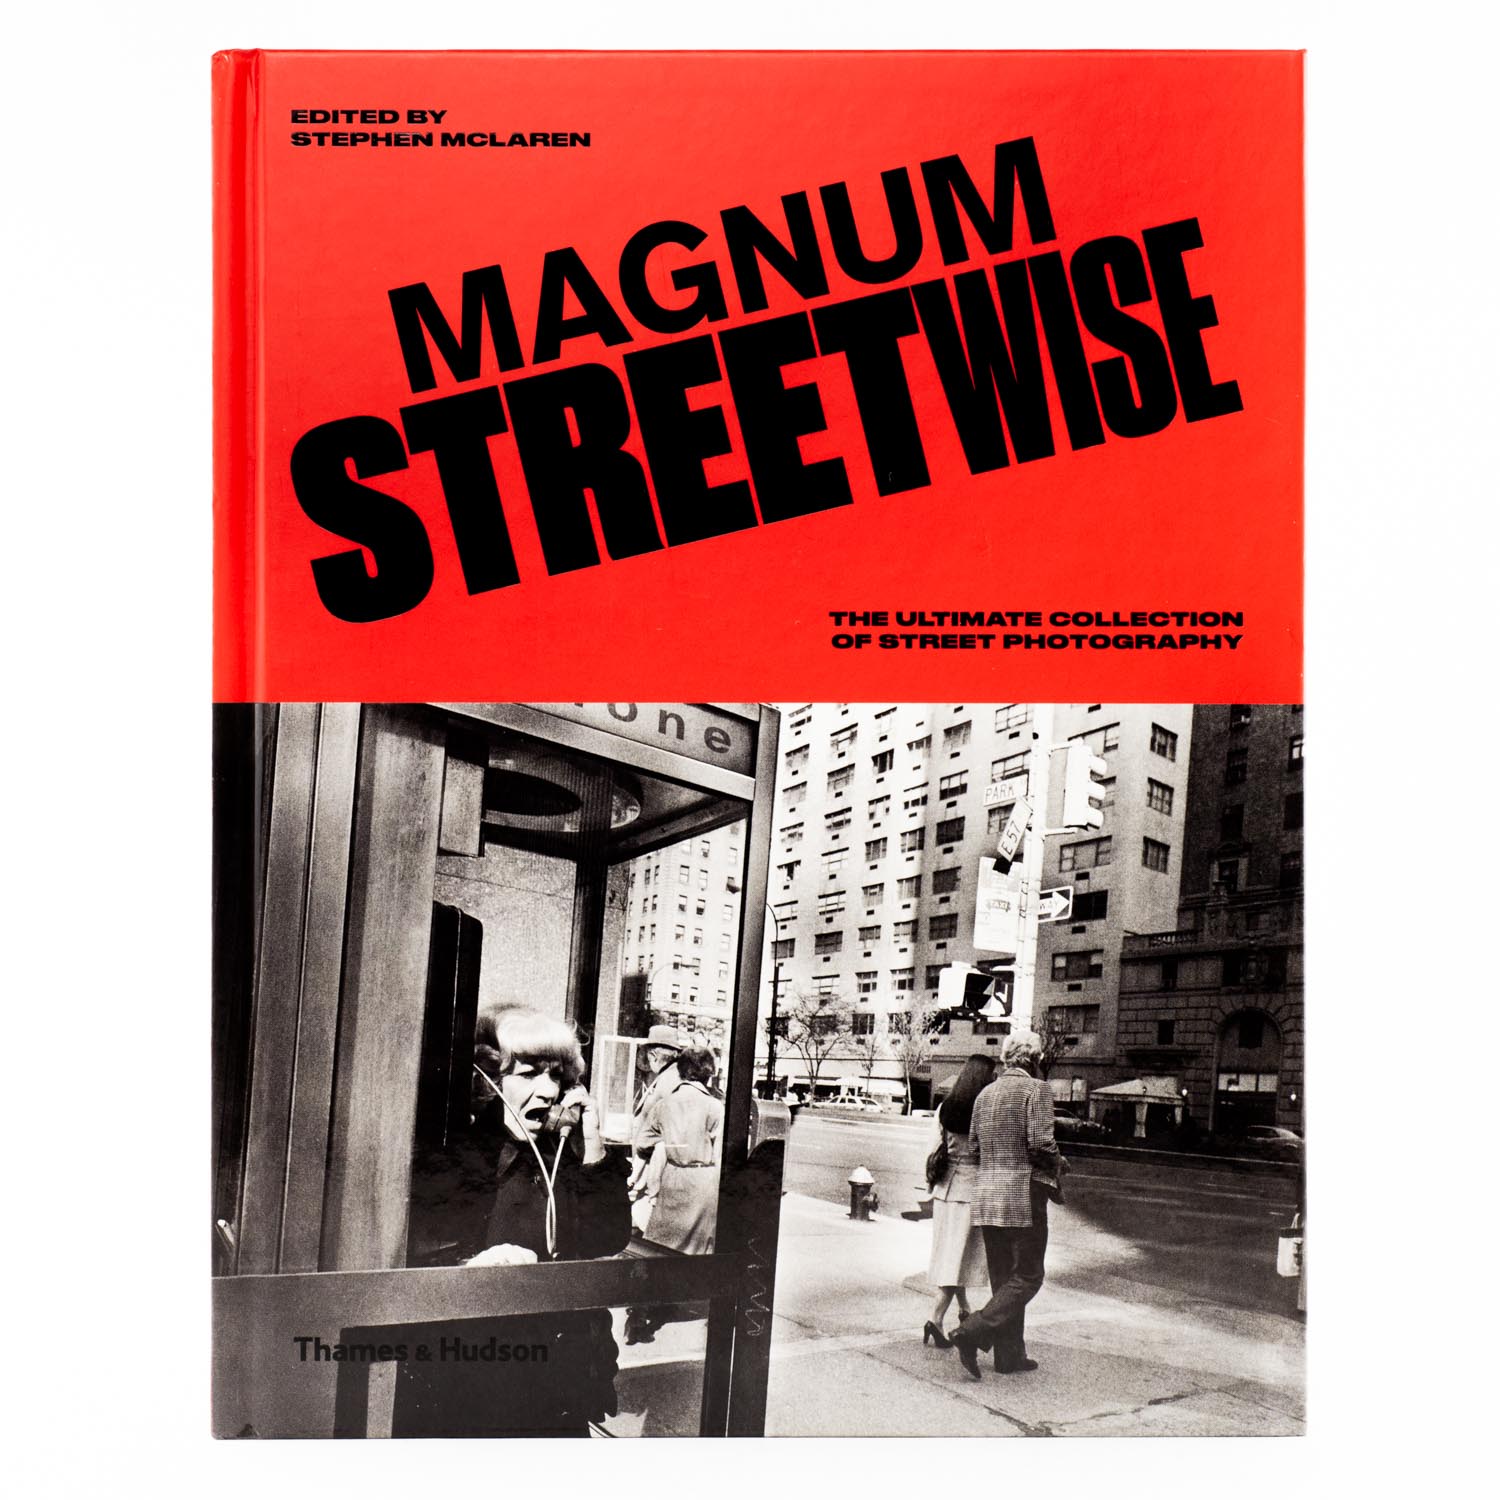 TThumbnail image for Magnum Streetwise